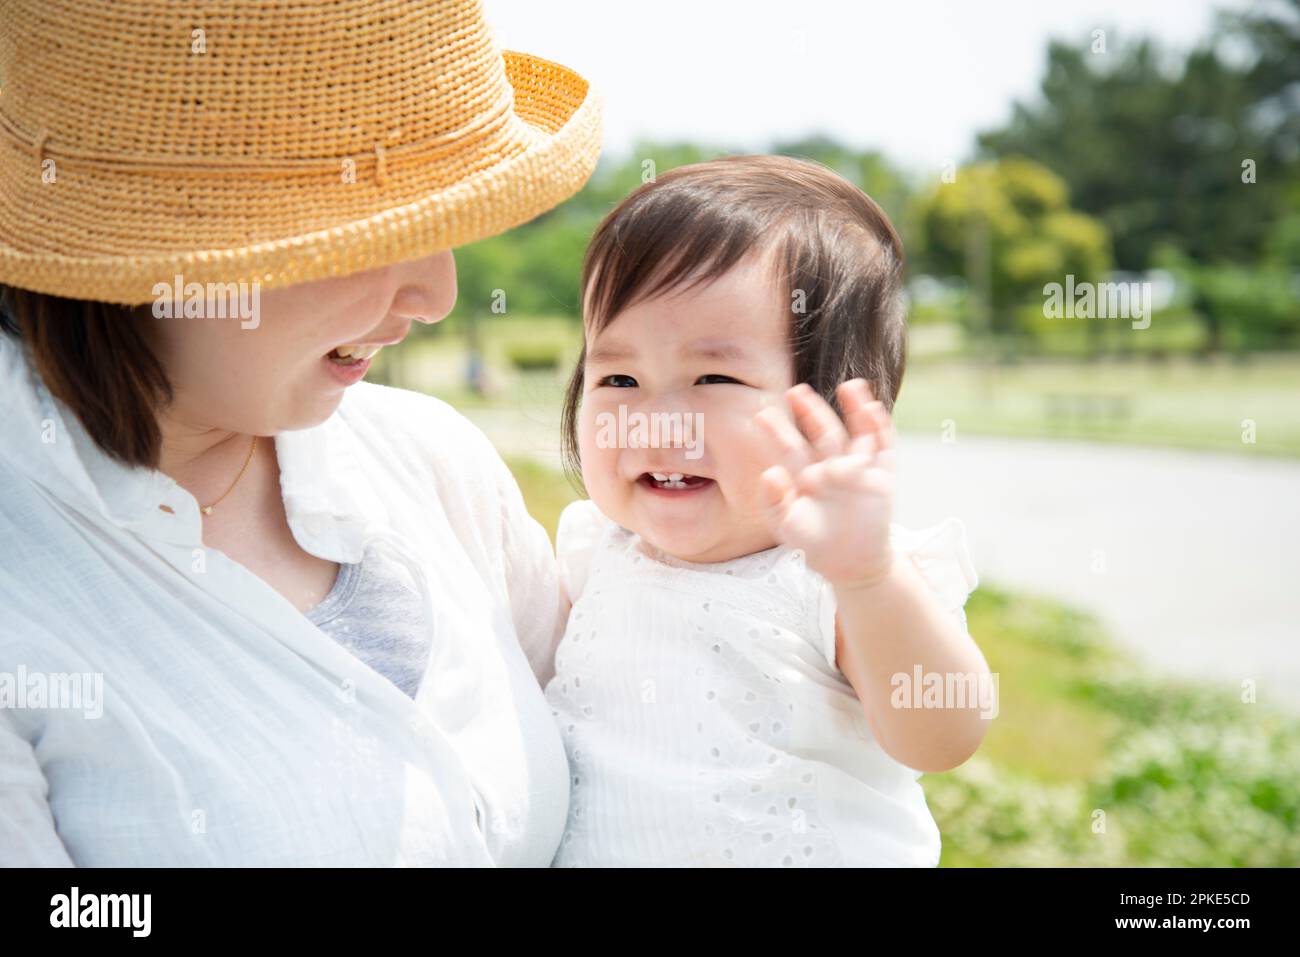 Laughing baby being carried by mother Stock Photo